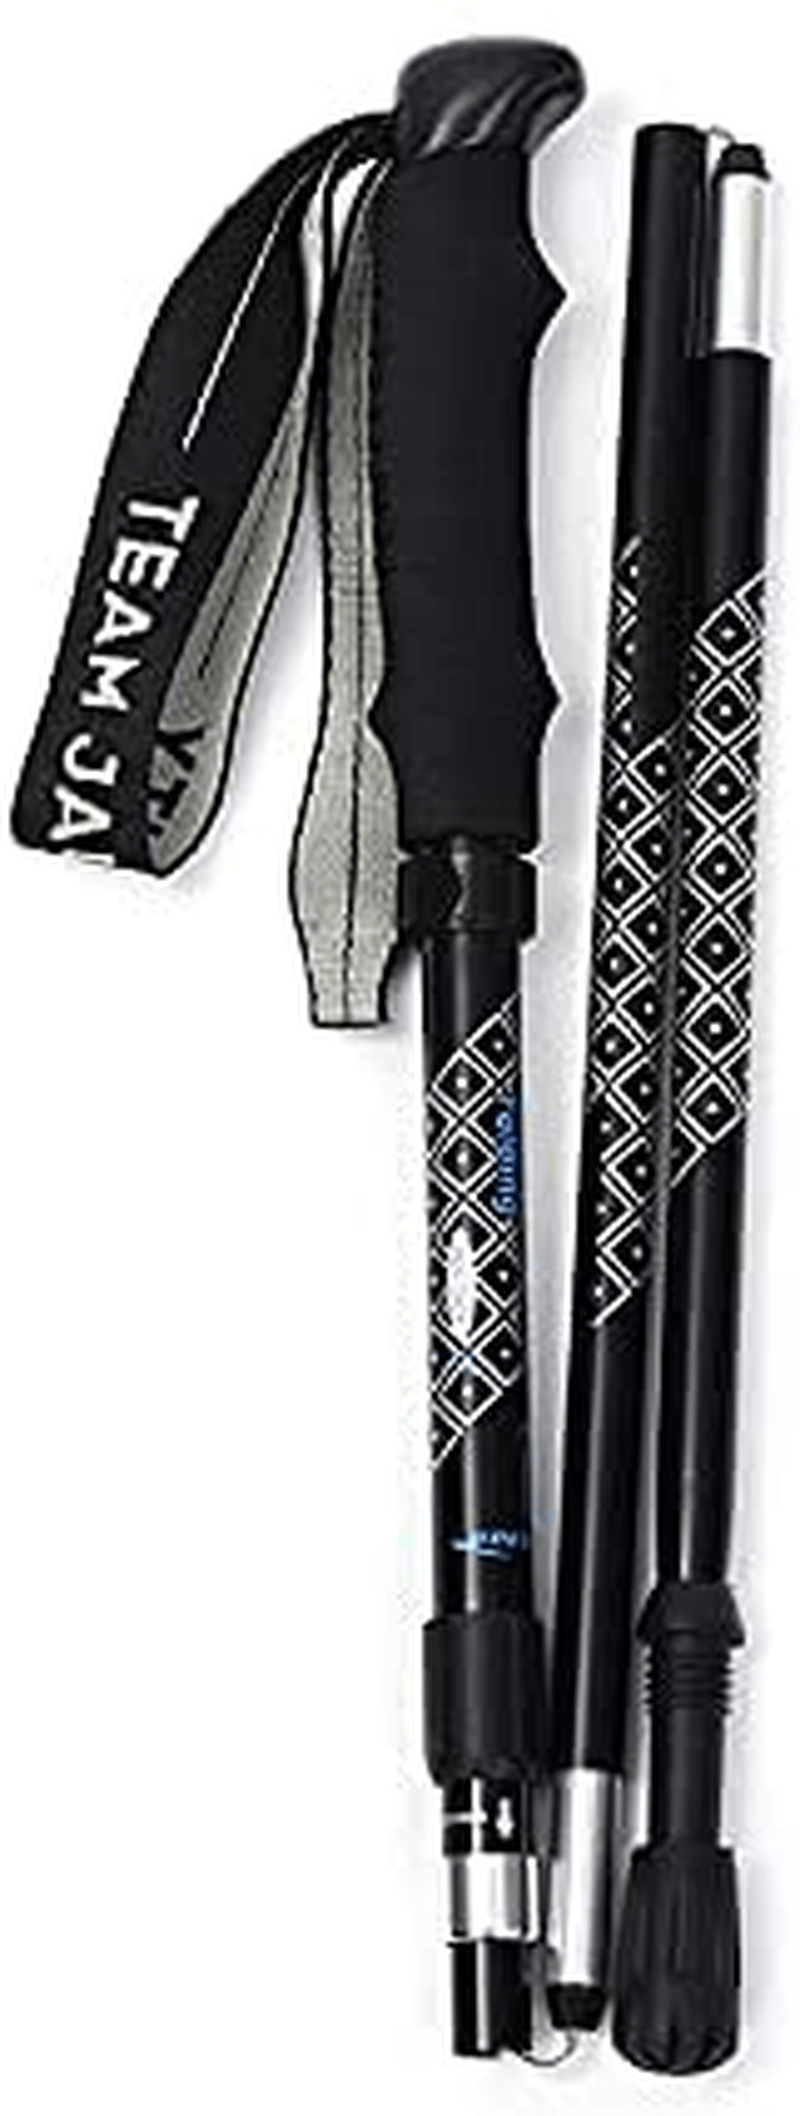 CCLINEE Travel Folding Trekking Hiking Poles (Set of 2),Collapsible Adjustable Walking Sticks Portable Mobility Aid for Walker Hikers Gift Sporting Goods > Outdoor Recreation > Camping & Hiking > Hiking Poles CCLINEE   